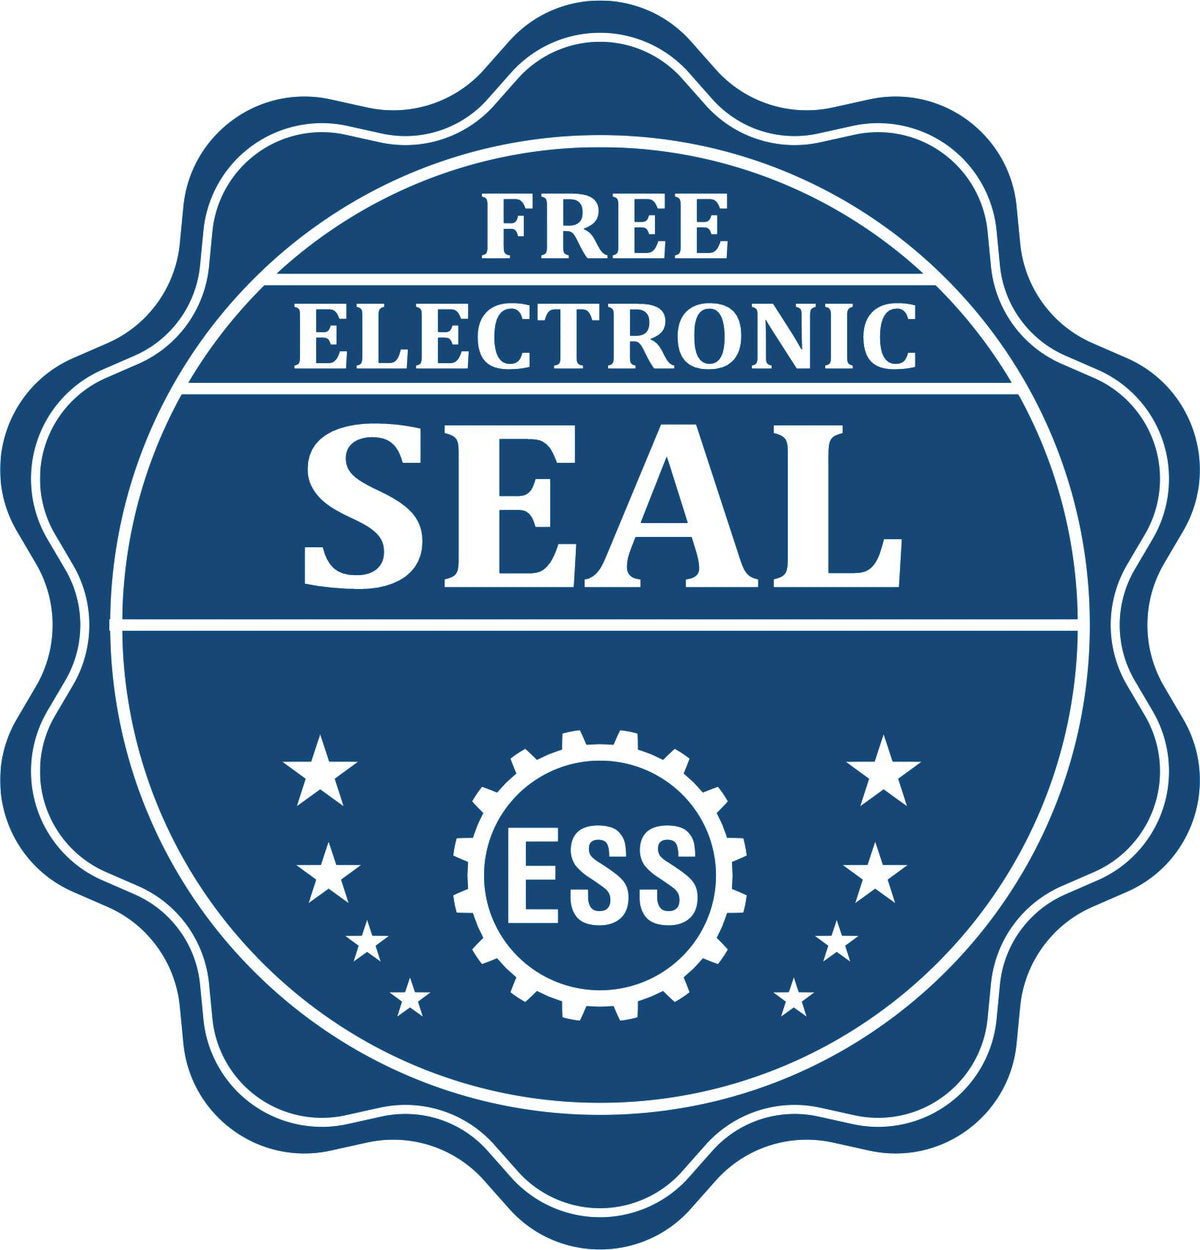 A badge showing a free electronic seal for the Heavy Duty Cast Iron Maryland Geologist Seal Embosser with stars and the ESS gear on the emblem.